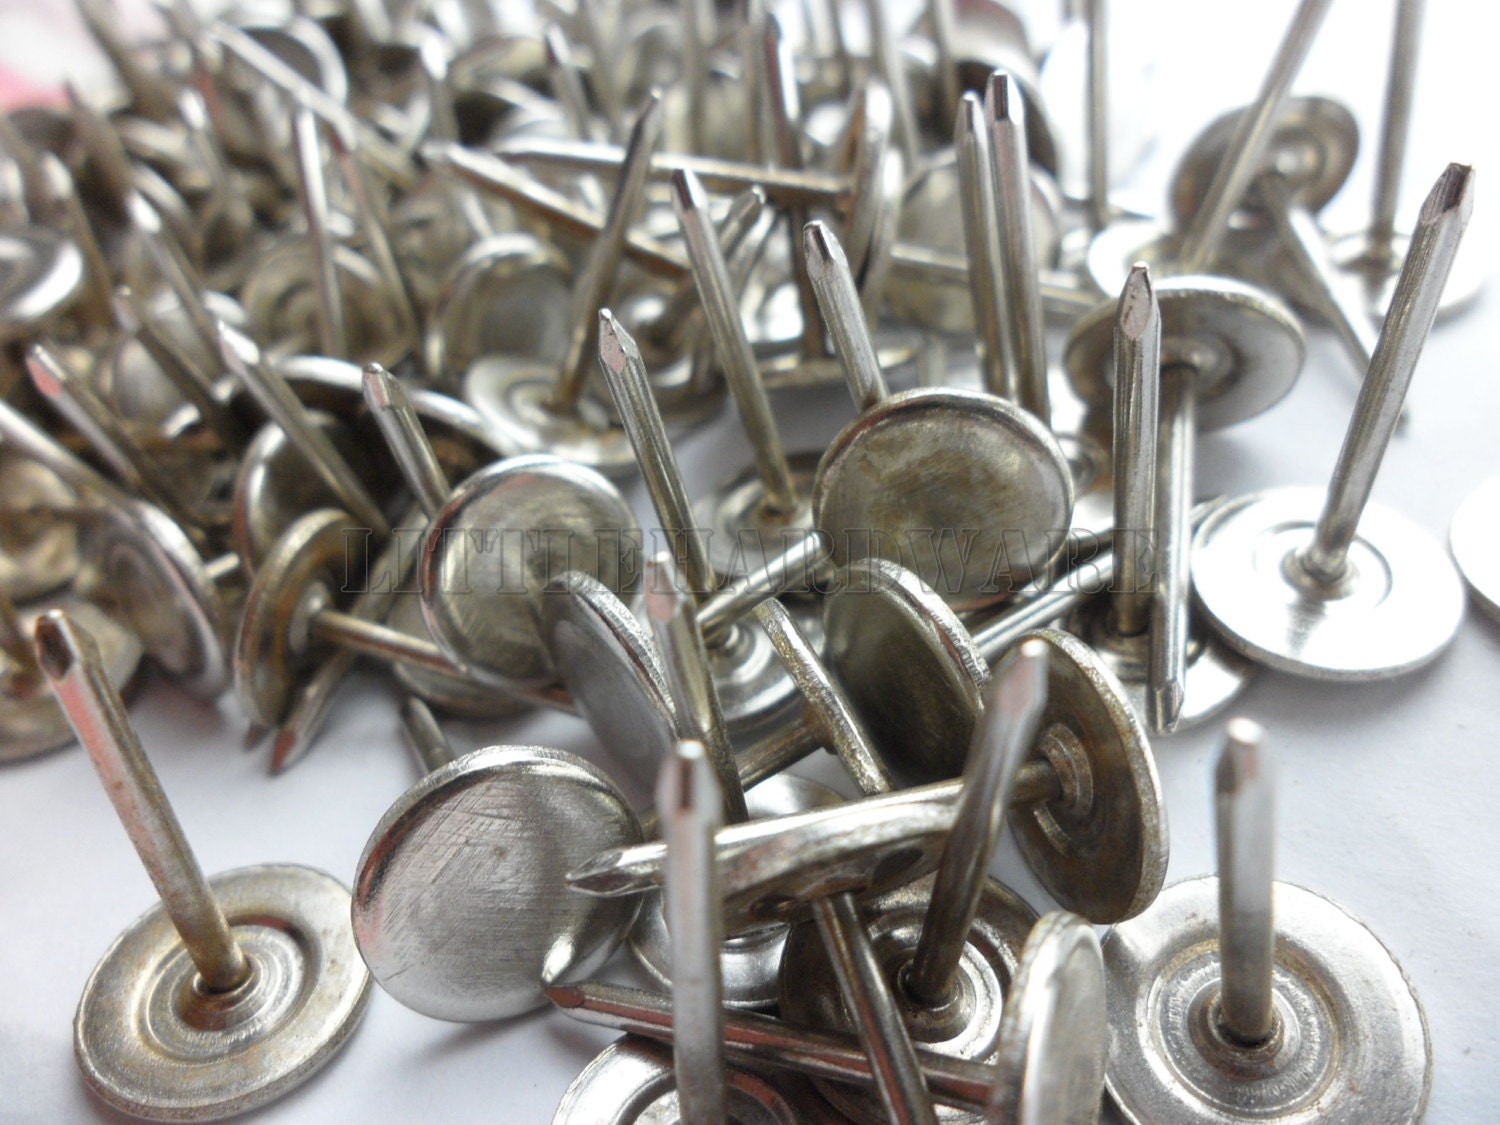 Silver & Gold Flat Round Push Pins, Simple Nickel Pins to Mark Travels,  Small Profile, Pushpin, Solid Metal No Plastic 